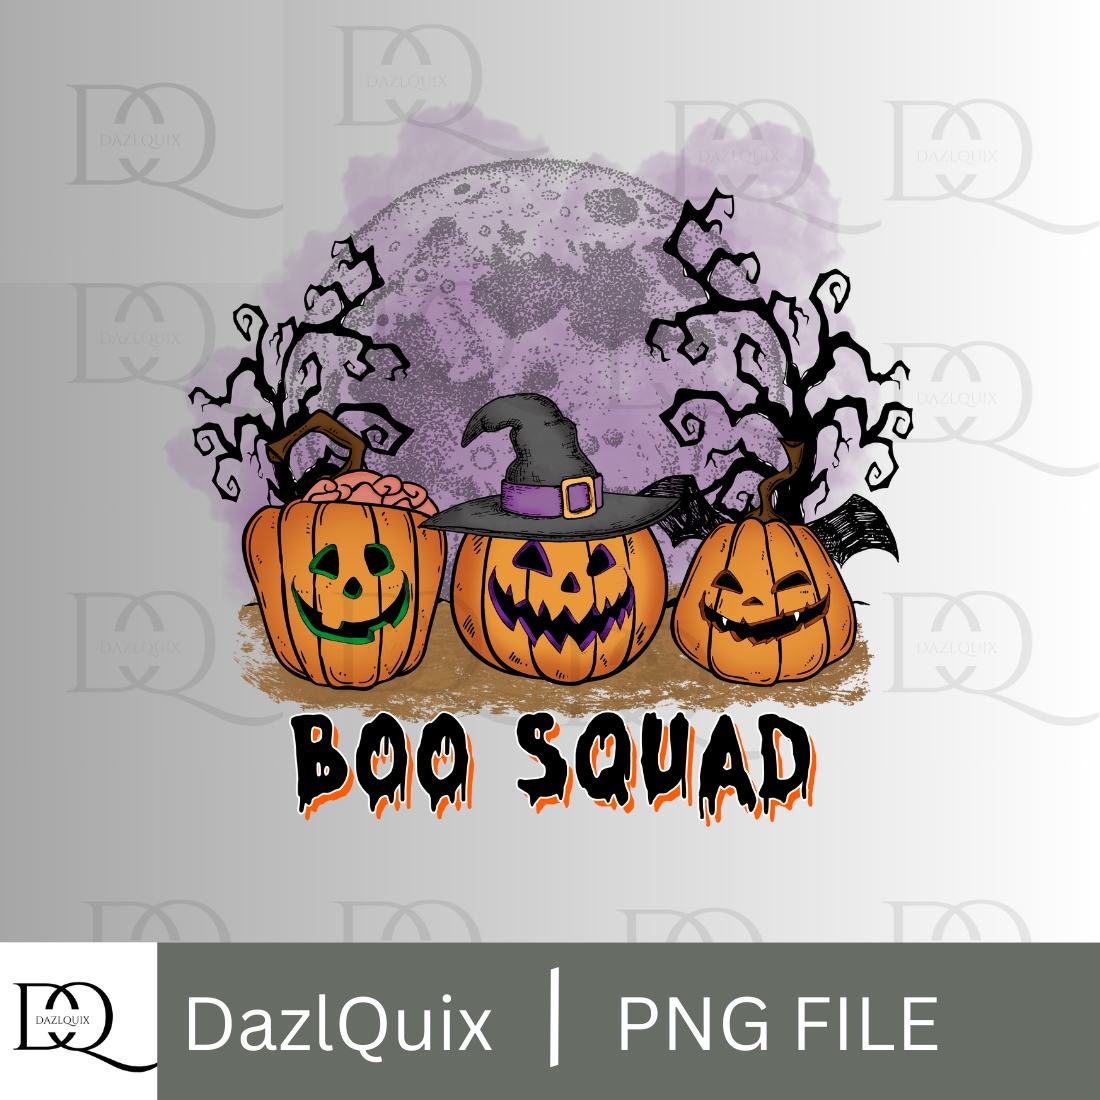 Halloween Boo Squad Pumpkin Boo preview image.